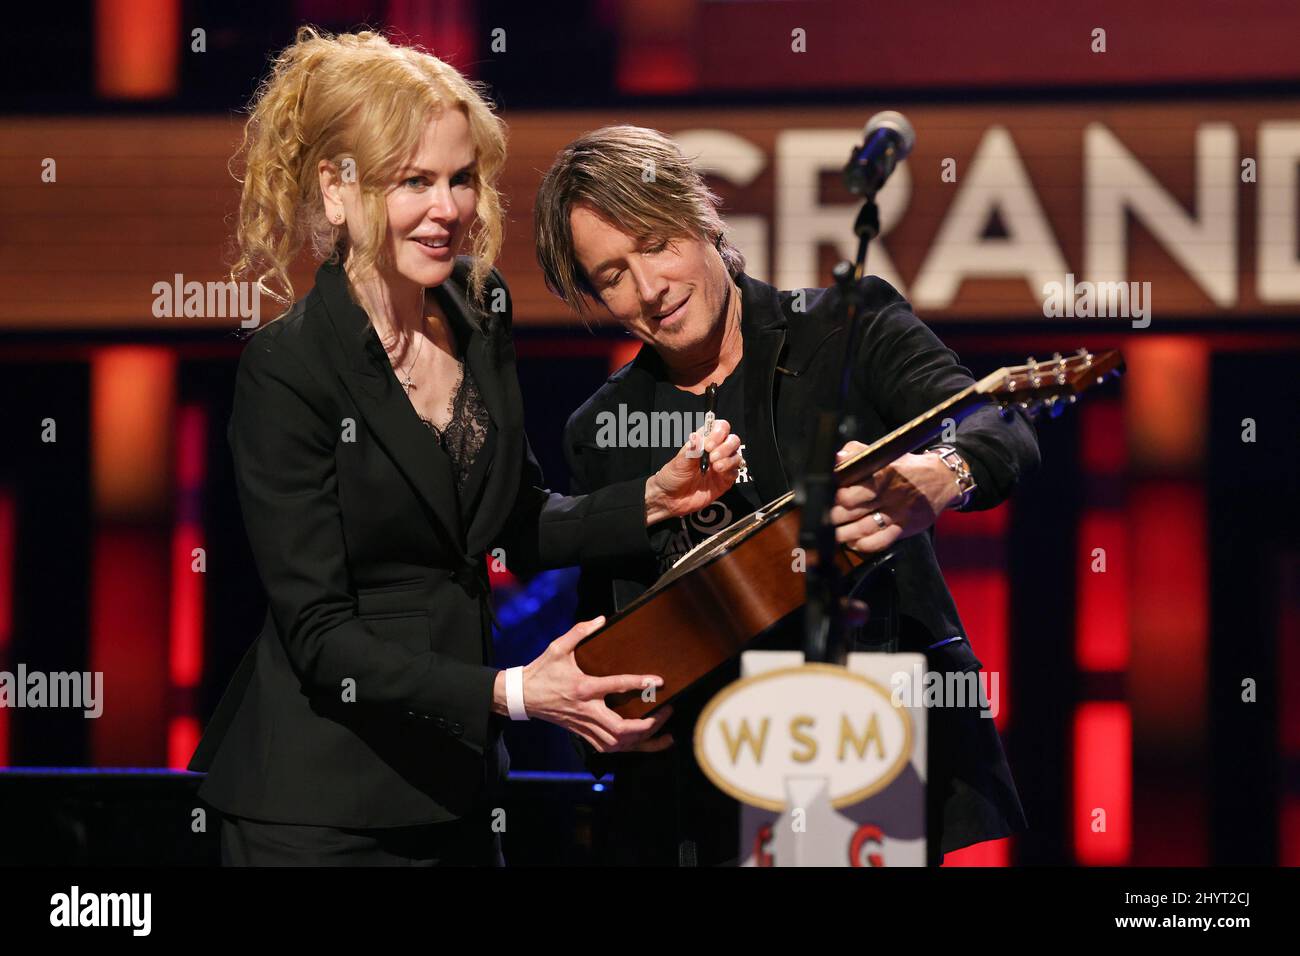 Nicole Kidman and Keith Urban performing onstage at Loretta Lynn's Friends: Hometown Rising benefit concert with proceeds benefiting the United Way of Humphreys County on September 13, 2021 in Nashville, TN. Stock Photo